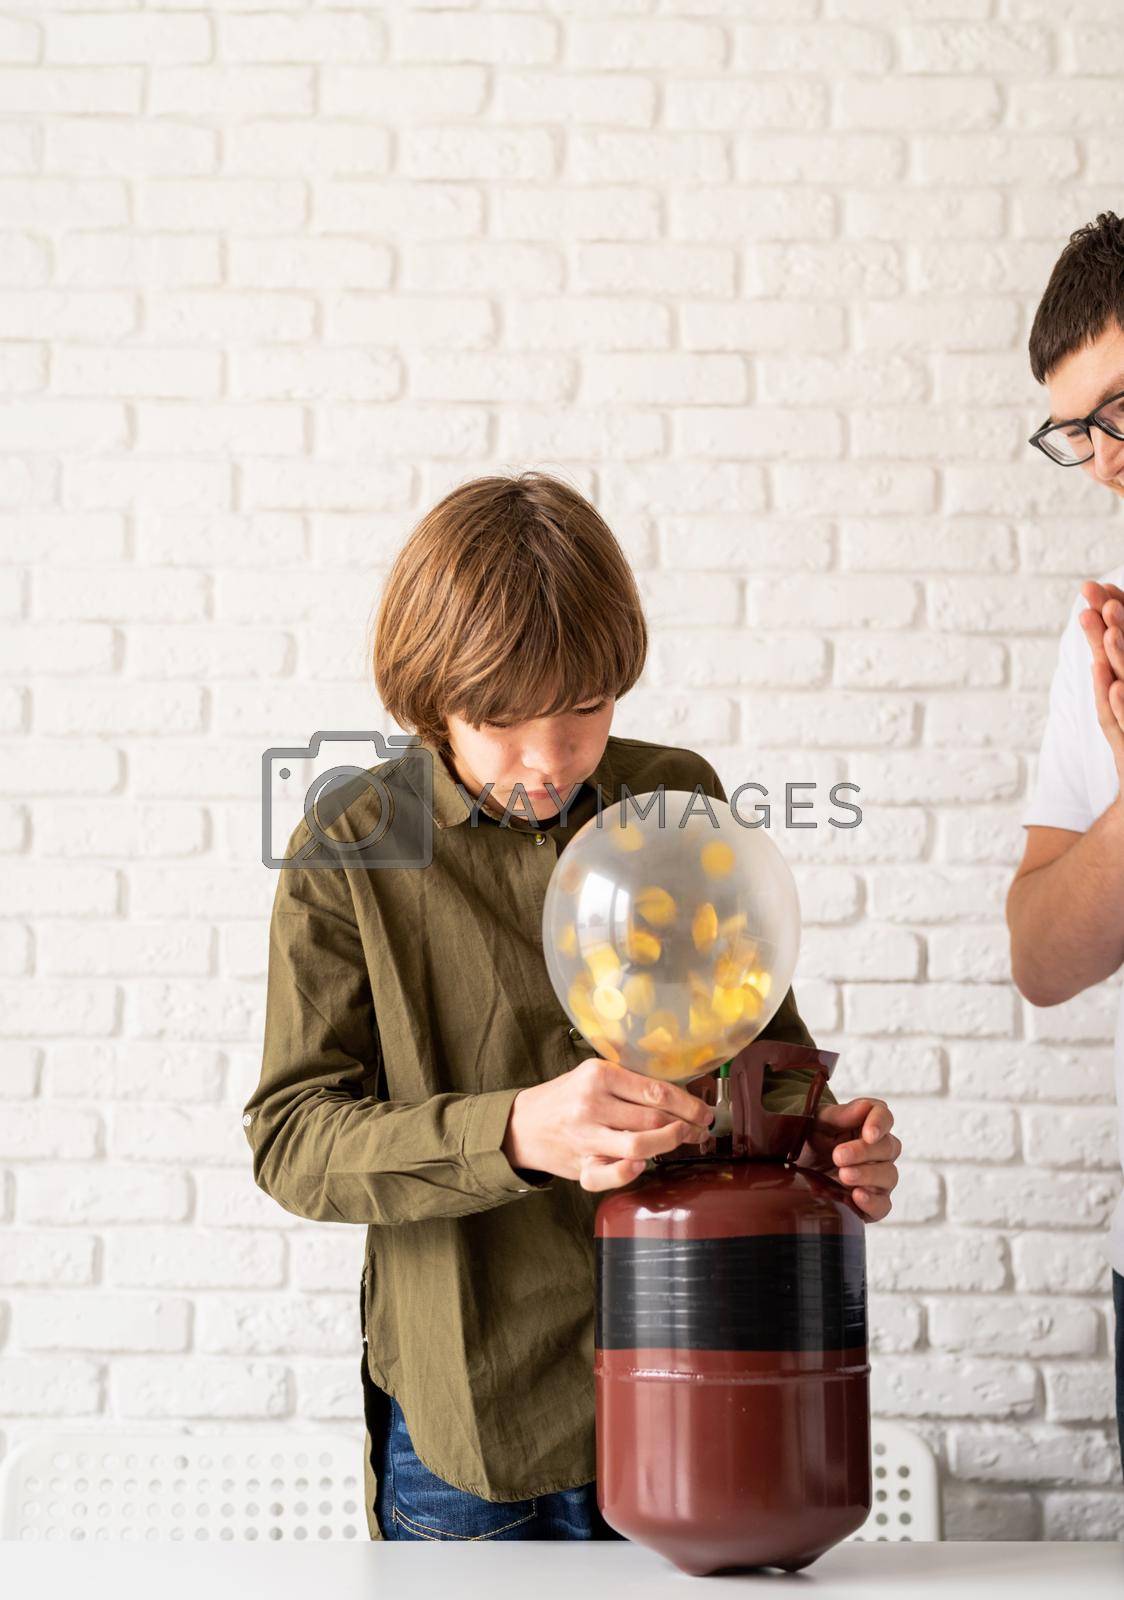 Royalty free image of boy blowing up a balloon with helium by Desperada